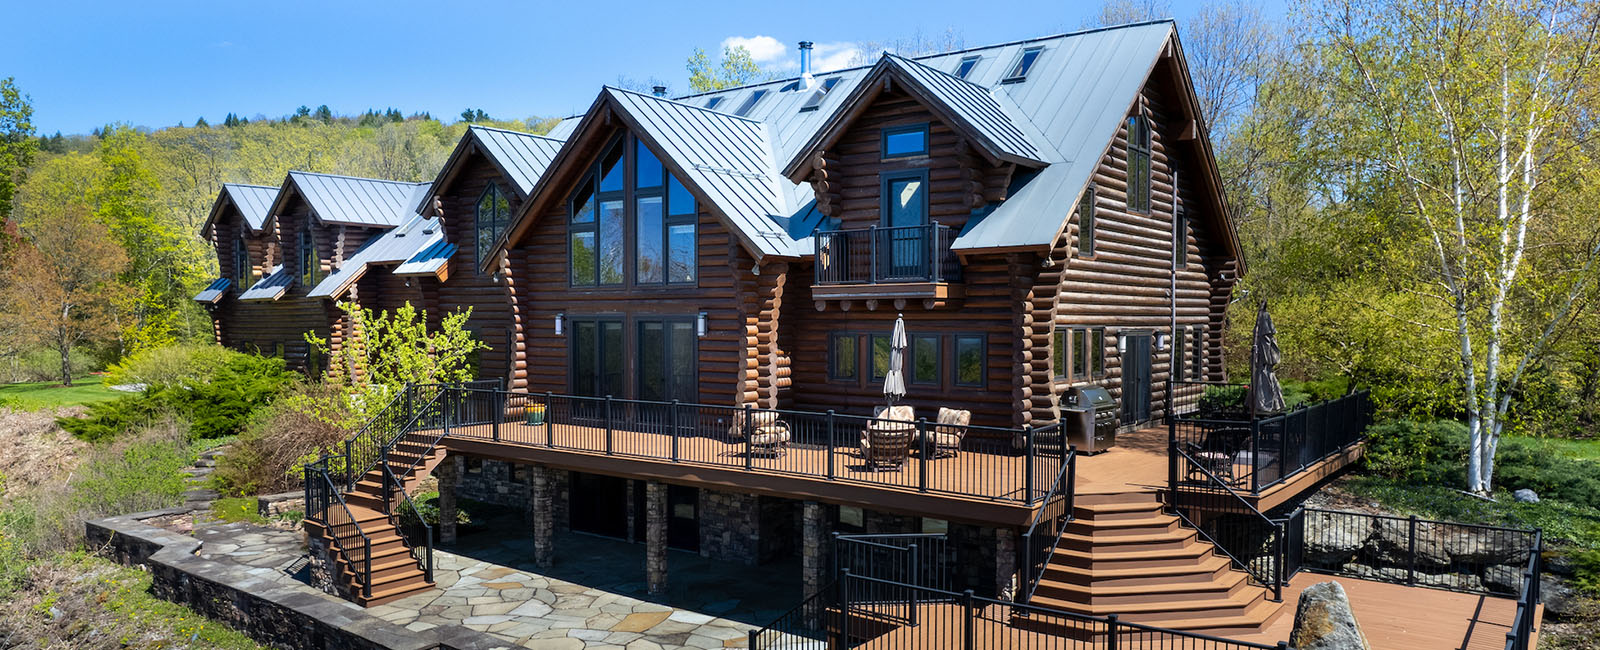 Decking Choices for Your New Log Home